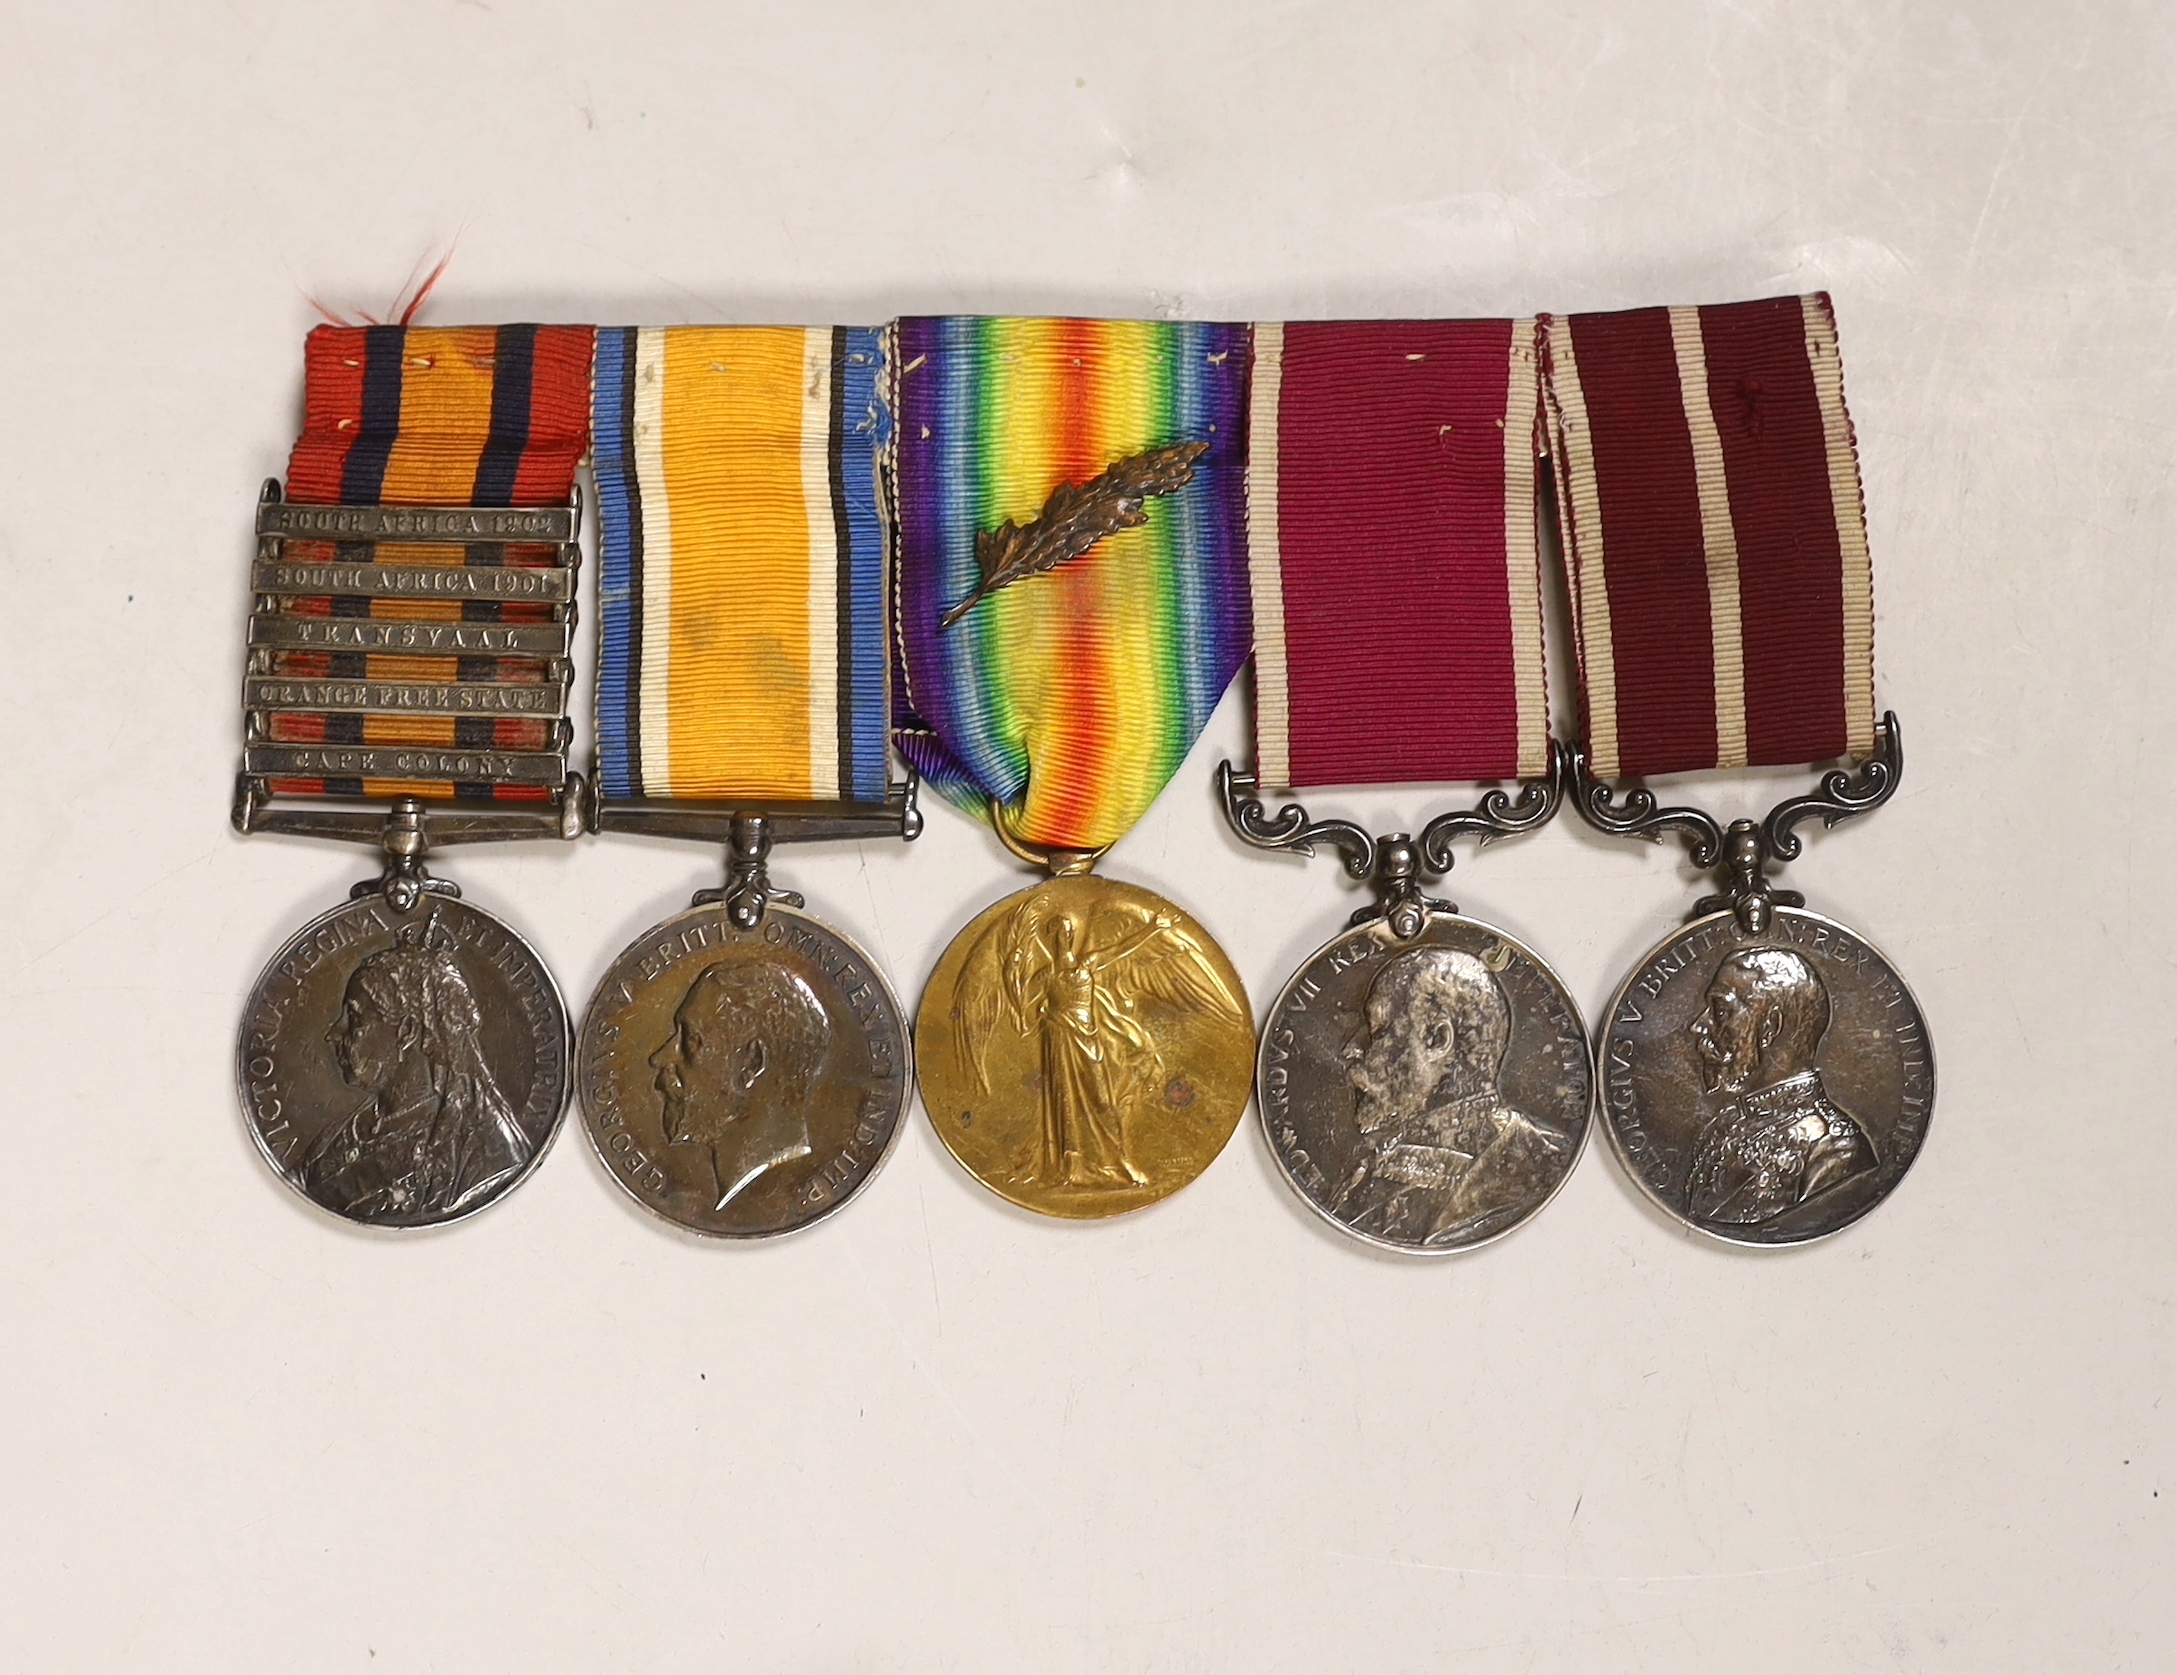 A Queen’s South Africa medal and WWI and meritorious service group of 5 medals to Lieut. O. Preston, 2nd Dragoon Guards